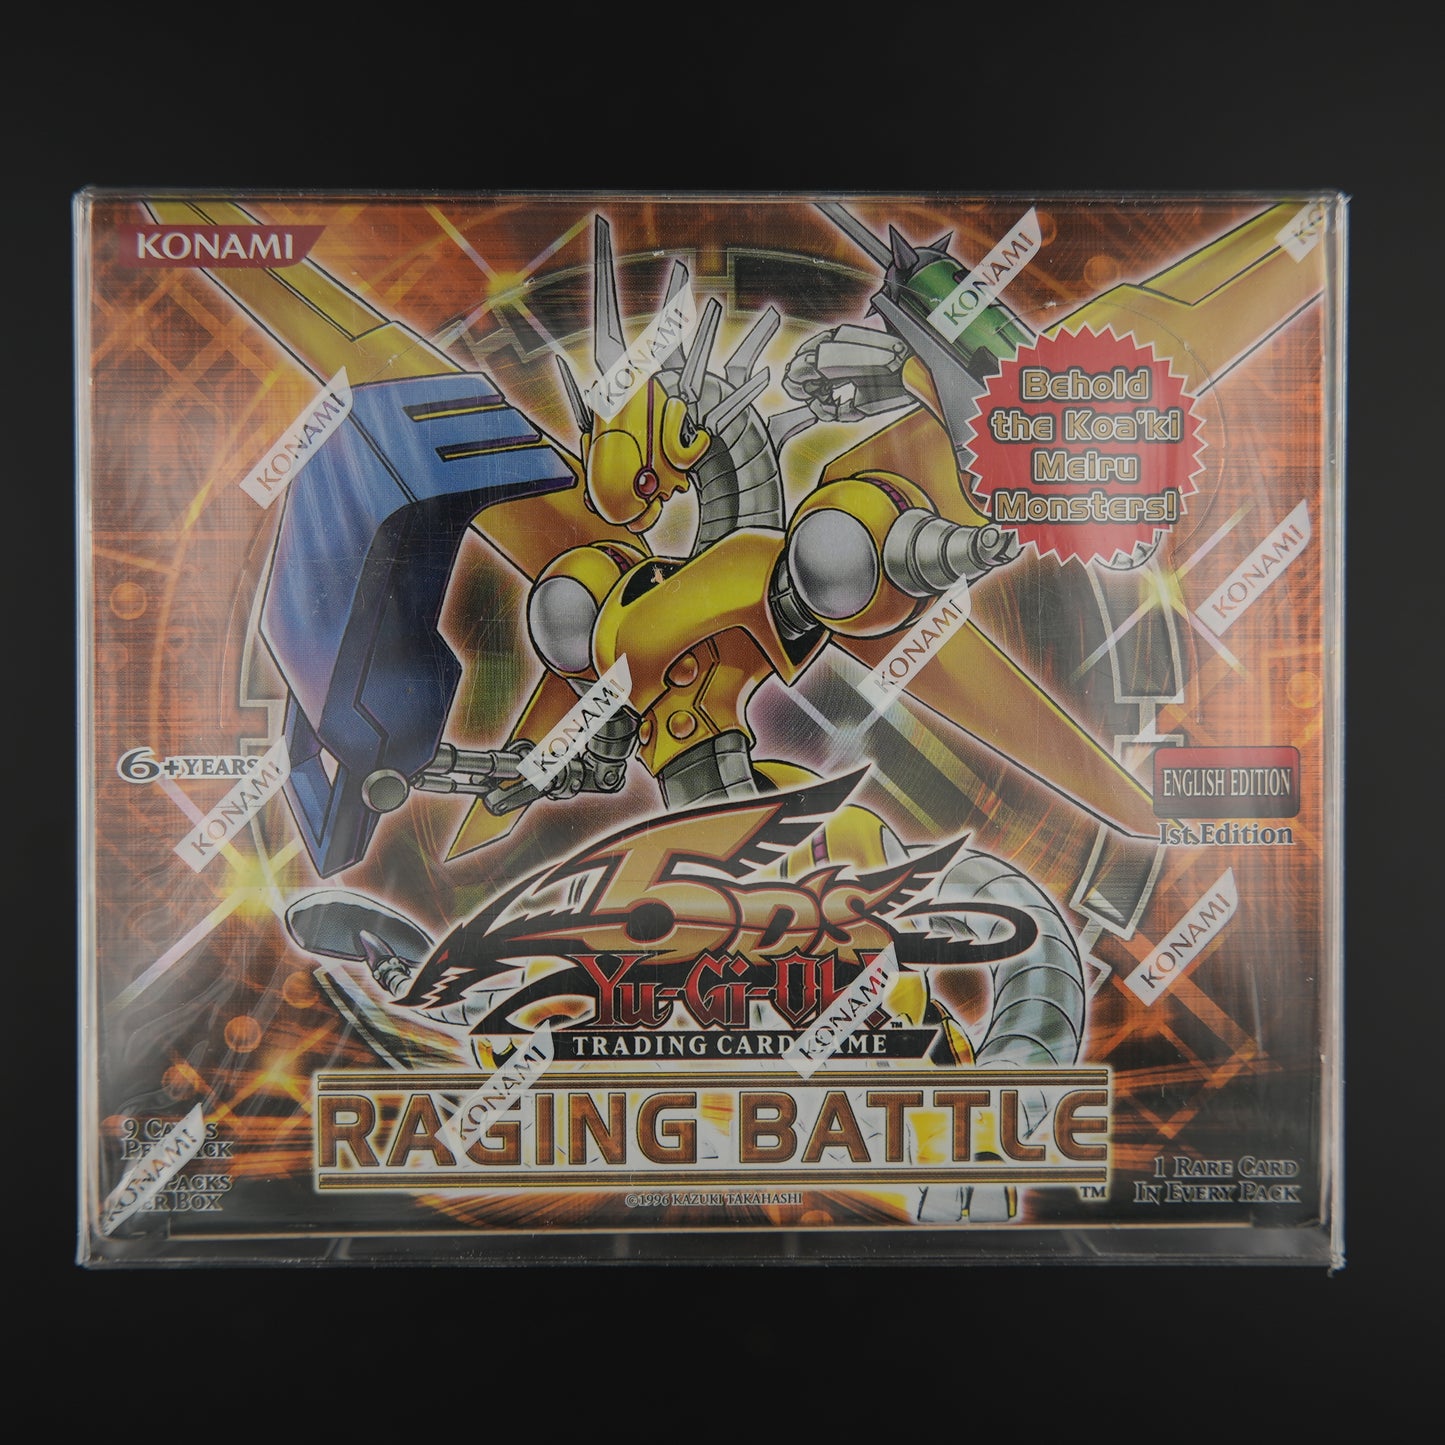 Raging Battle 1st Edition Booster Box